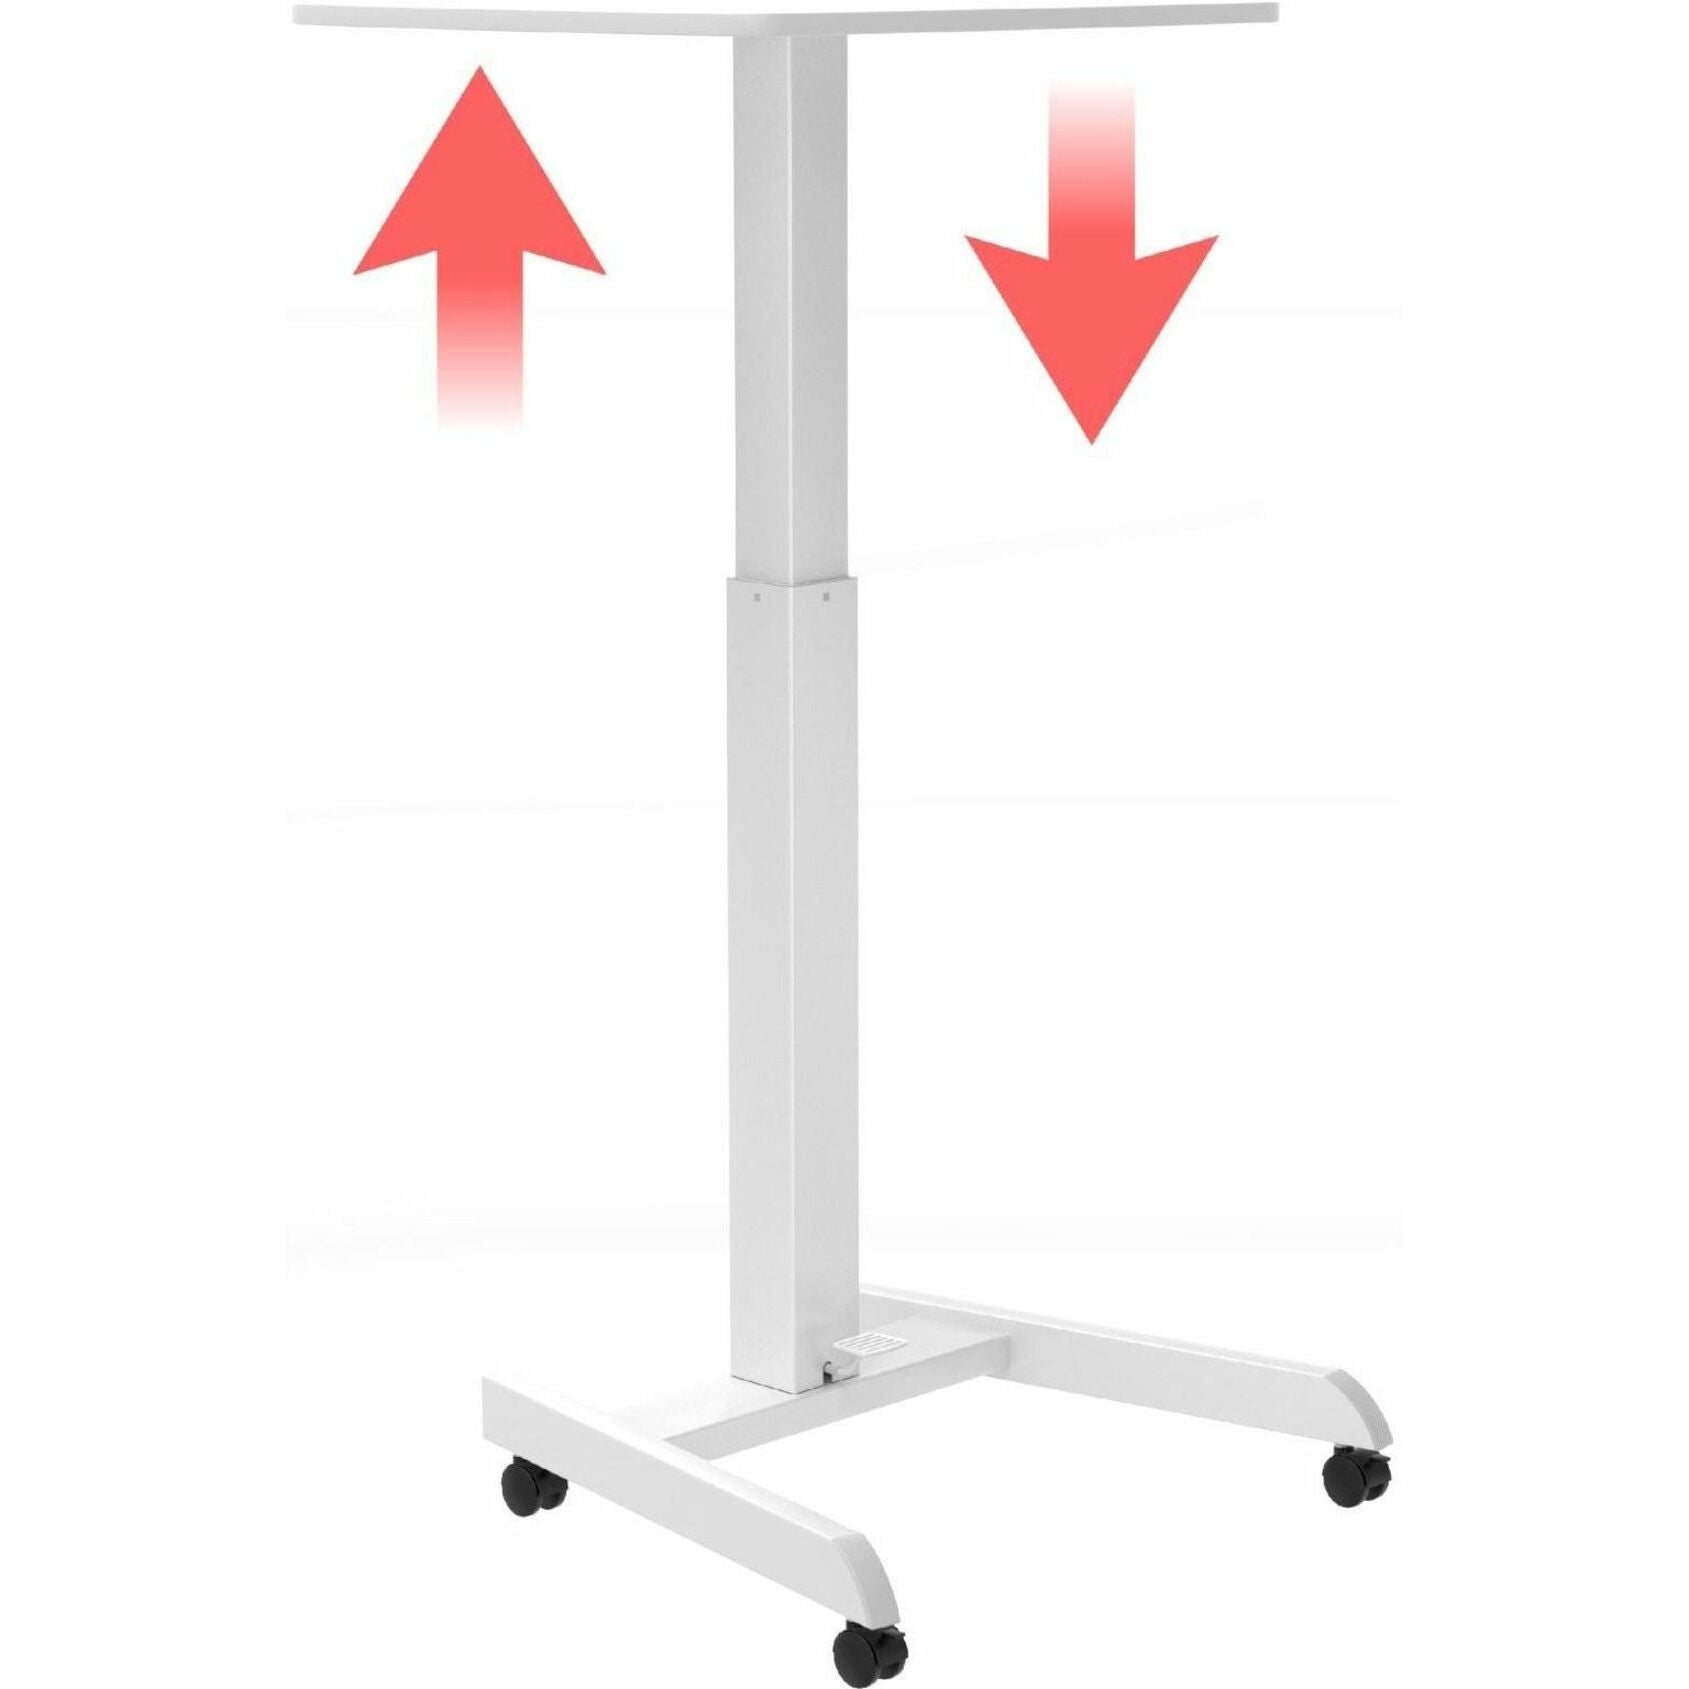 CTA Digital PAD-ARLTD Height-Adjustable Rolling Desk with 2 Grommet VESA Mounts, Compact, Portable, Gas Spring, Adjustable Height, Sturdy, Caster, Locking Casters, Foot Pedal, Articulating Arm, Rotate, Tilt, Cable Management, Smooth, Durable